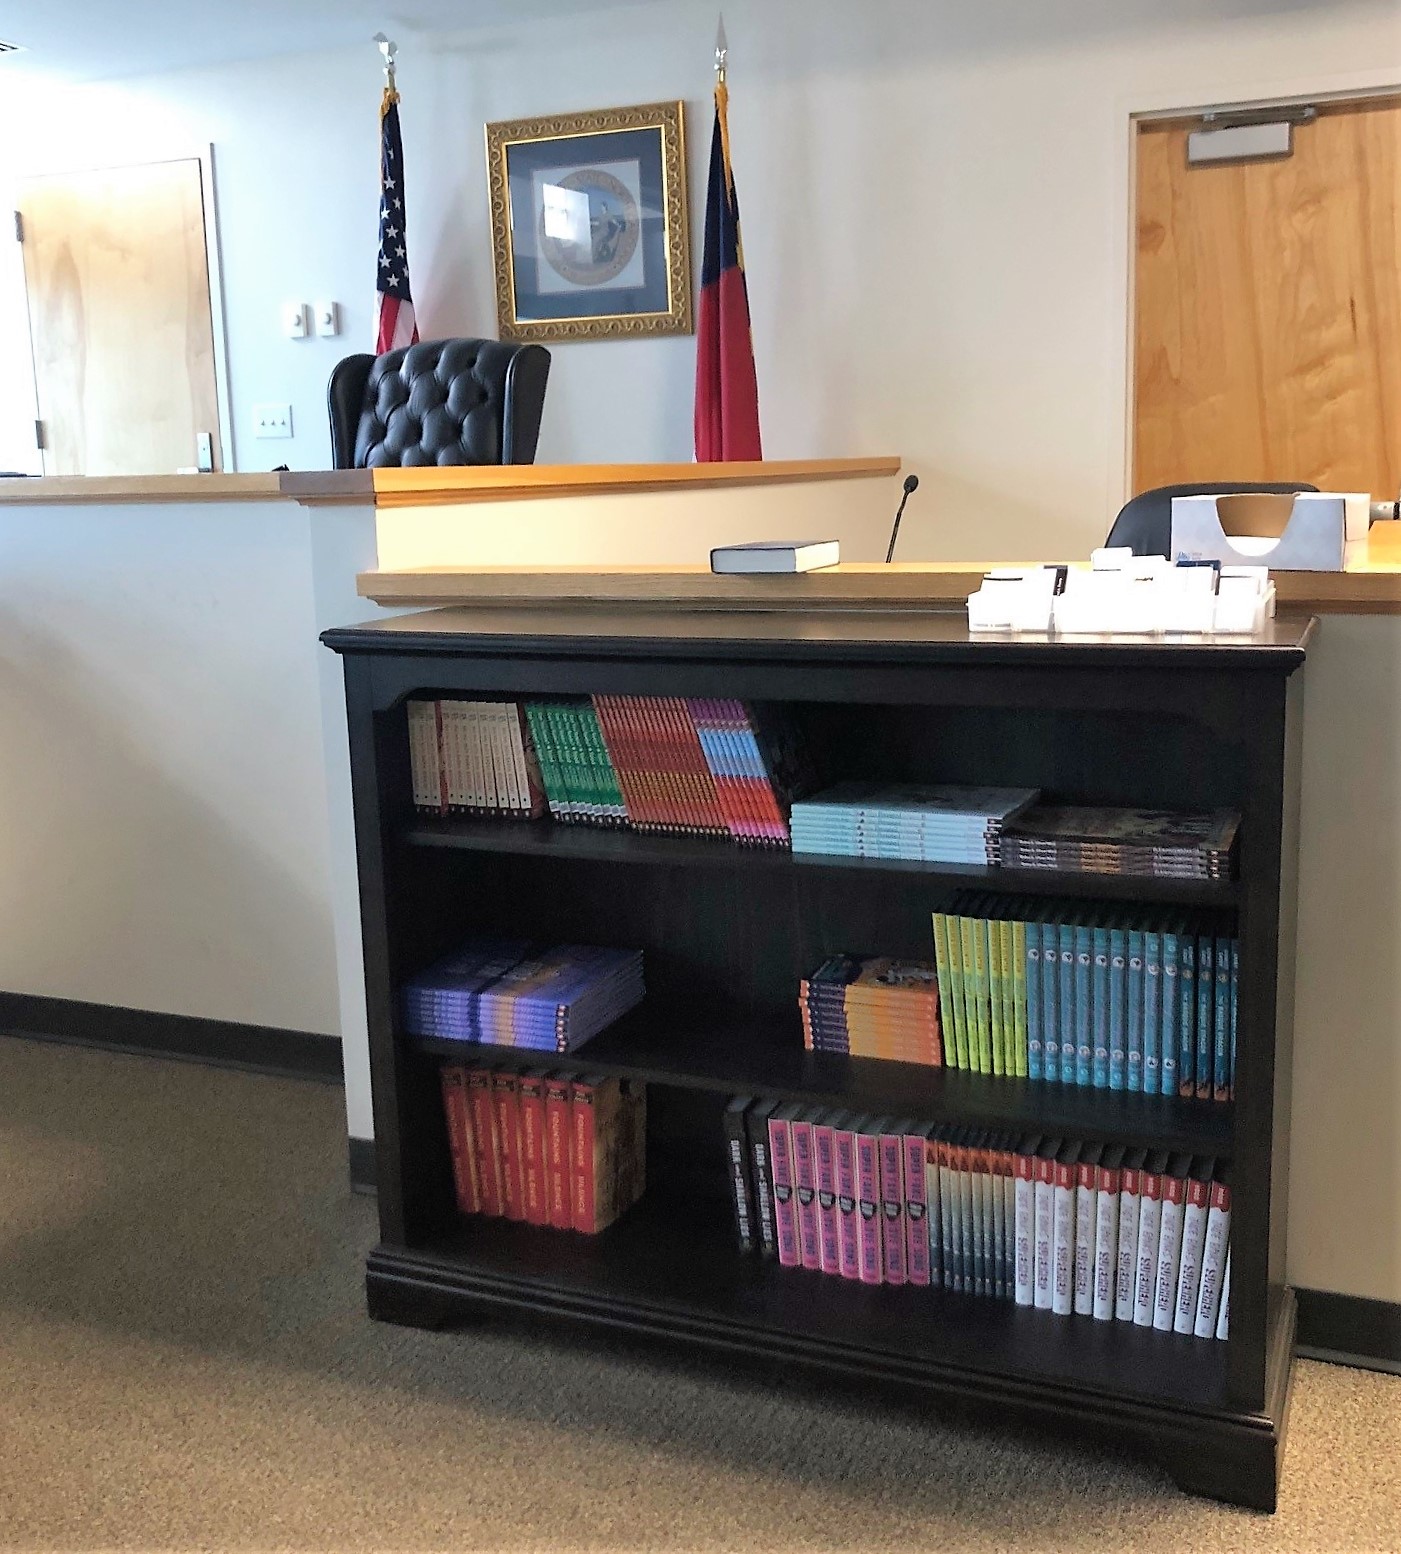 The bookshelf in the courtroom holds free books for children to take and keep. 